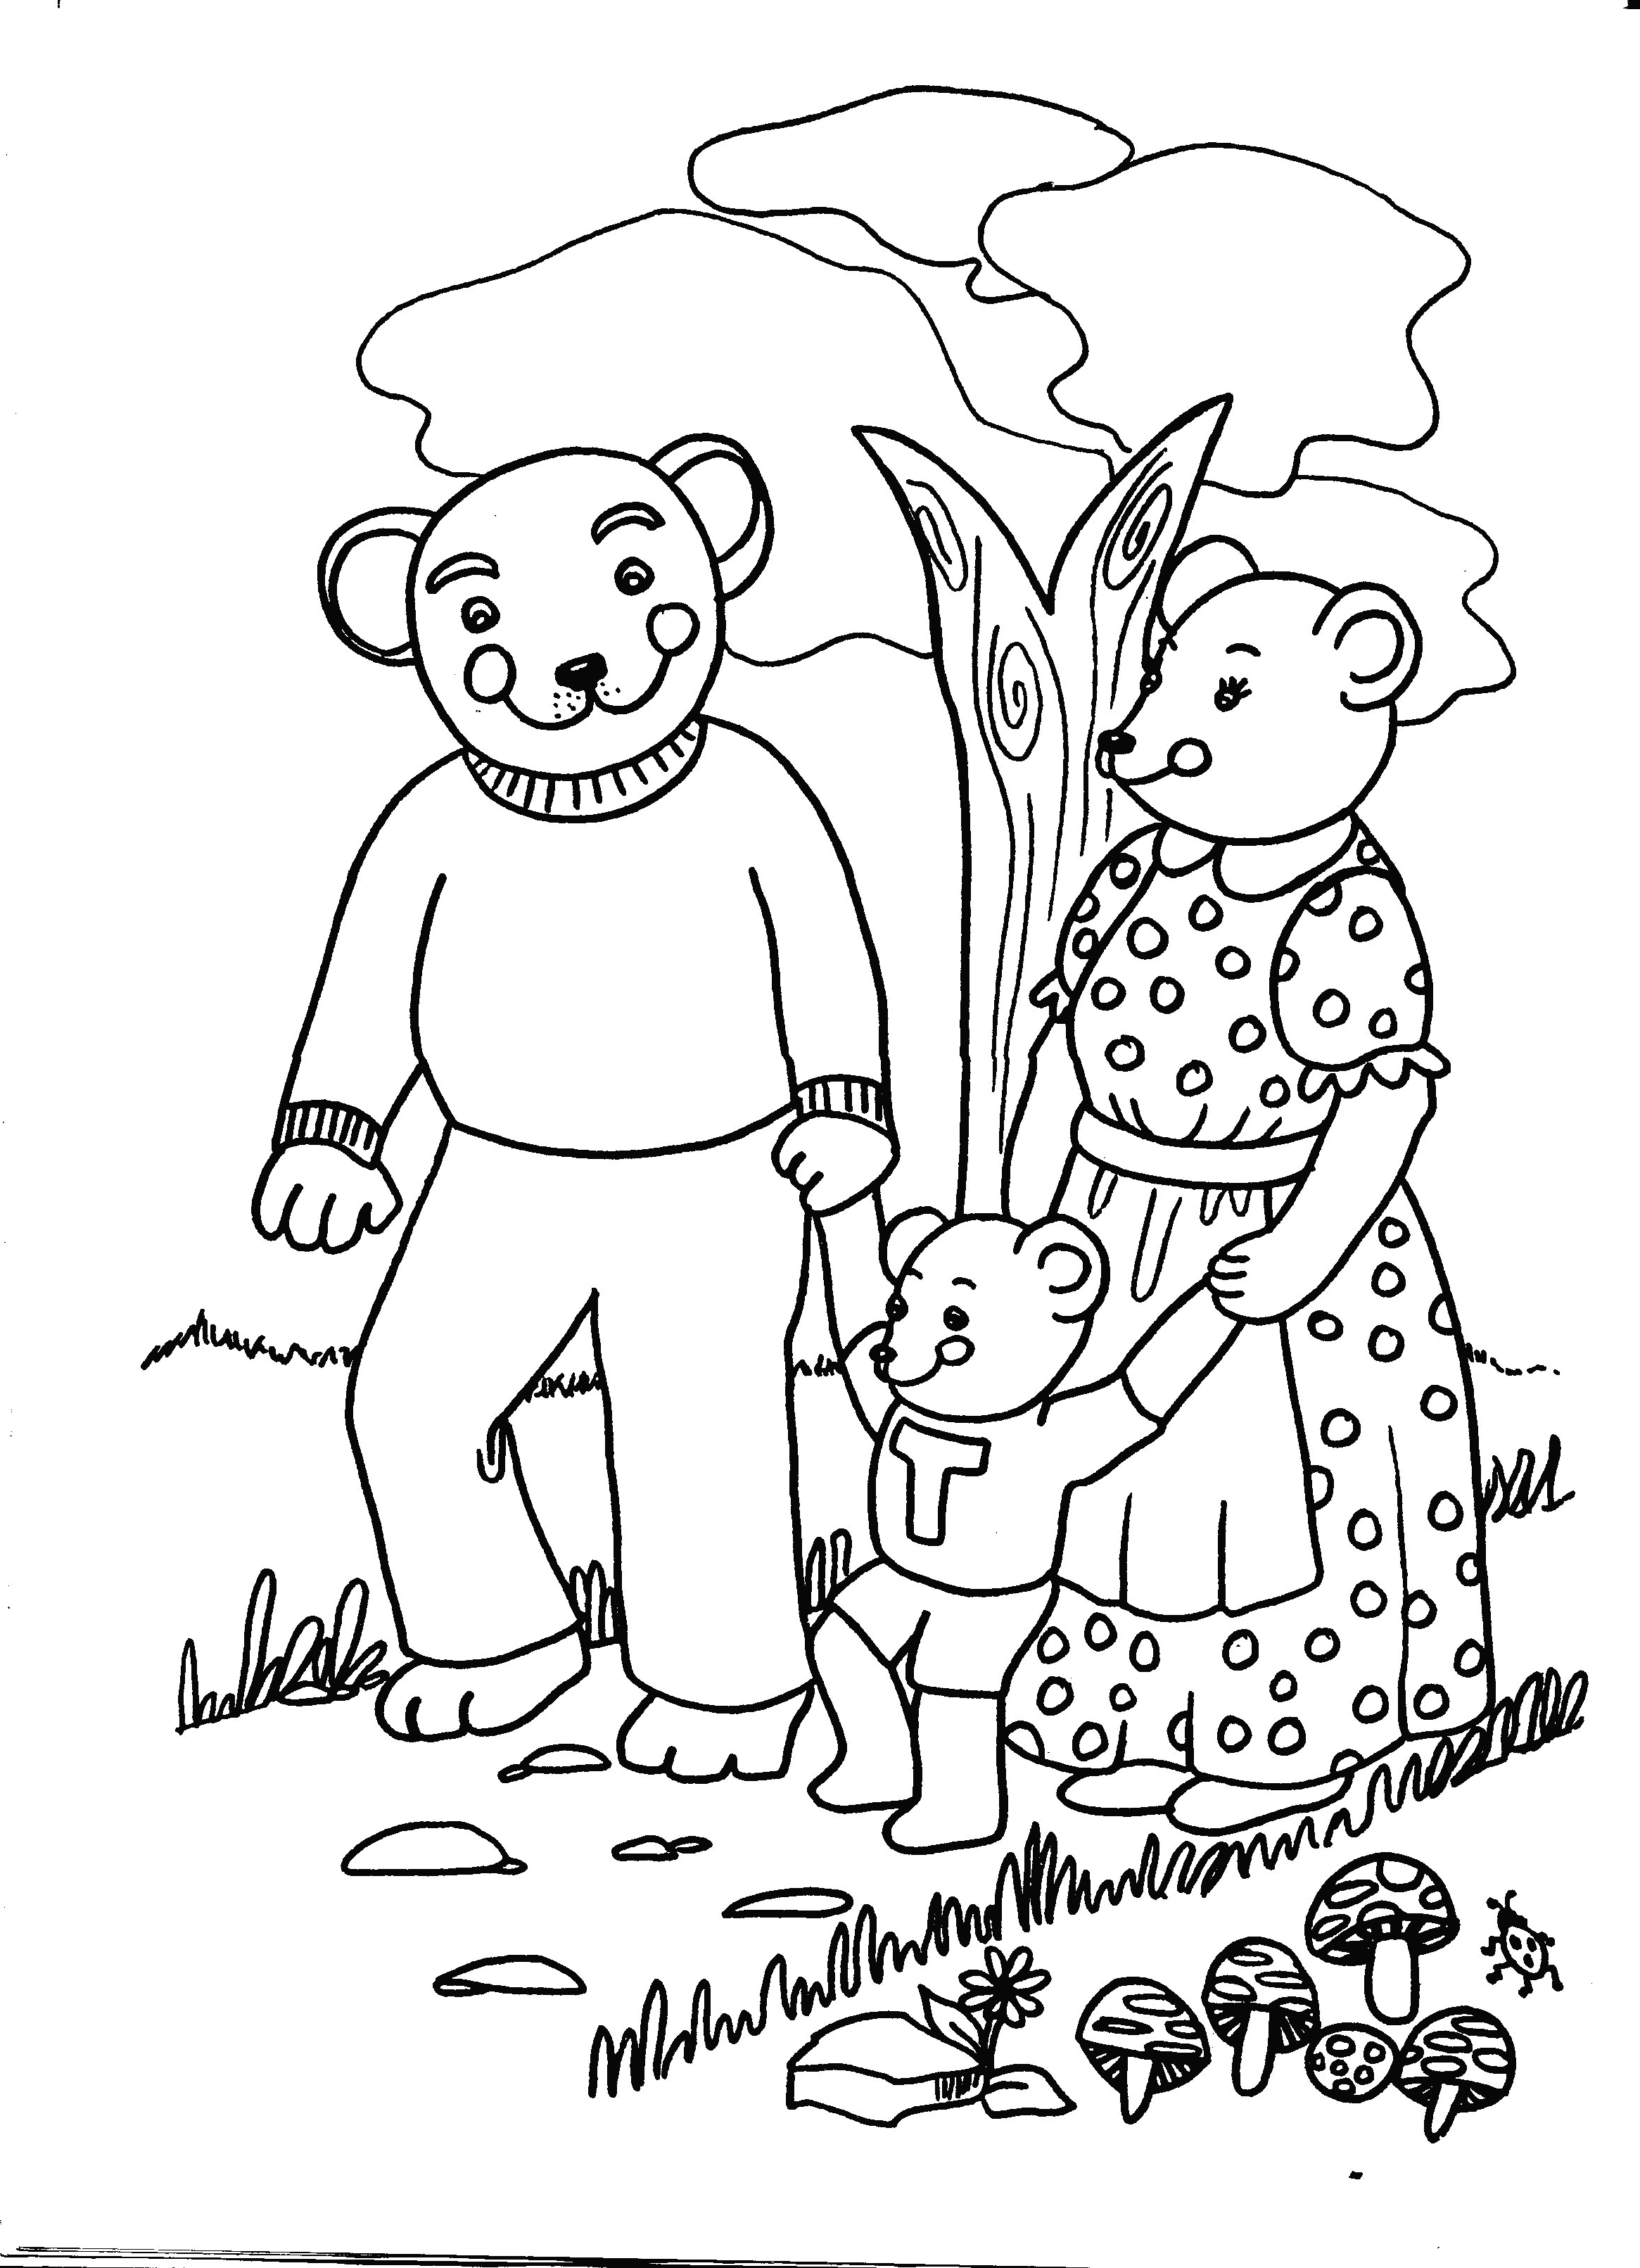 Countryside #50 (Nature) – Printable coloring pages